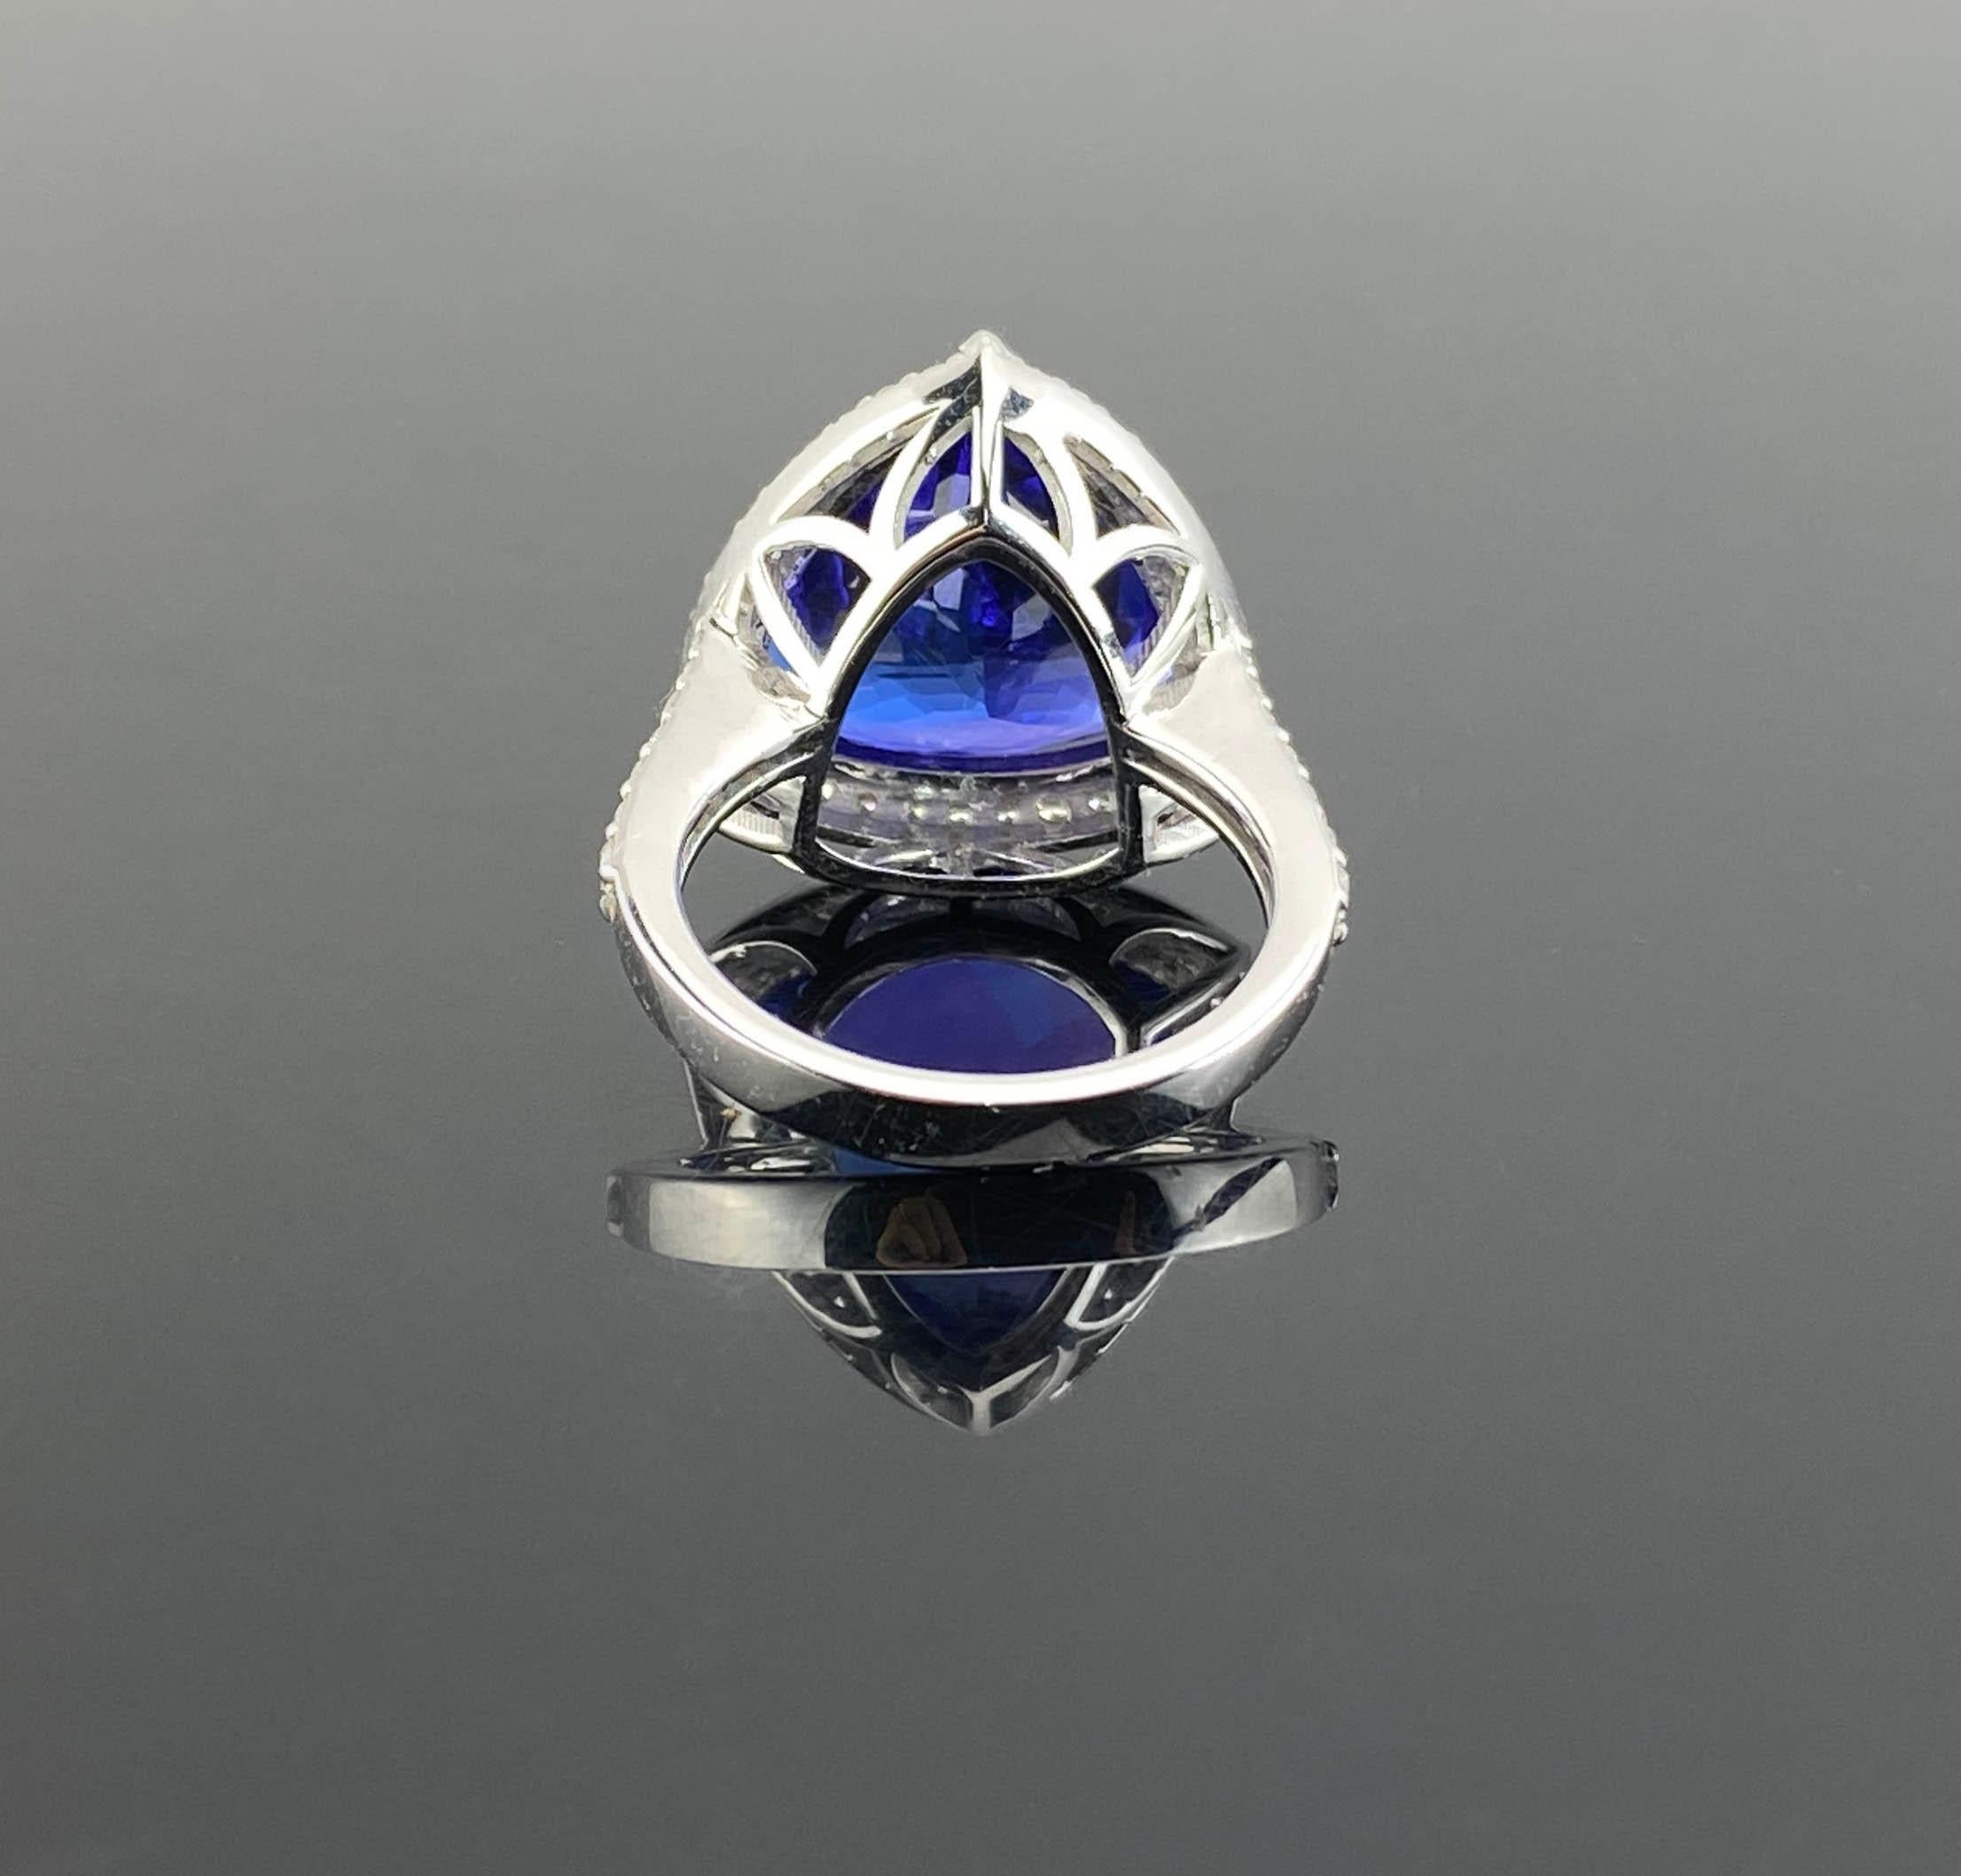 12.54 Carat Trillion Cut Tanzanite and Diamond Cocktail Ring Set in White Gold For Sale 1